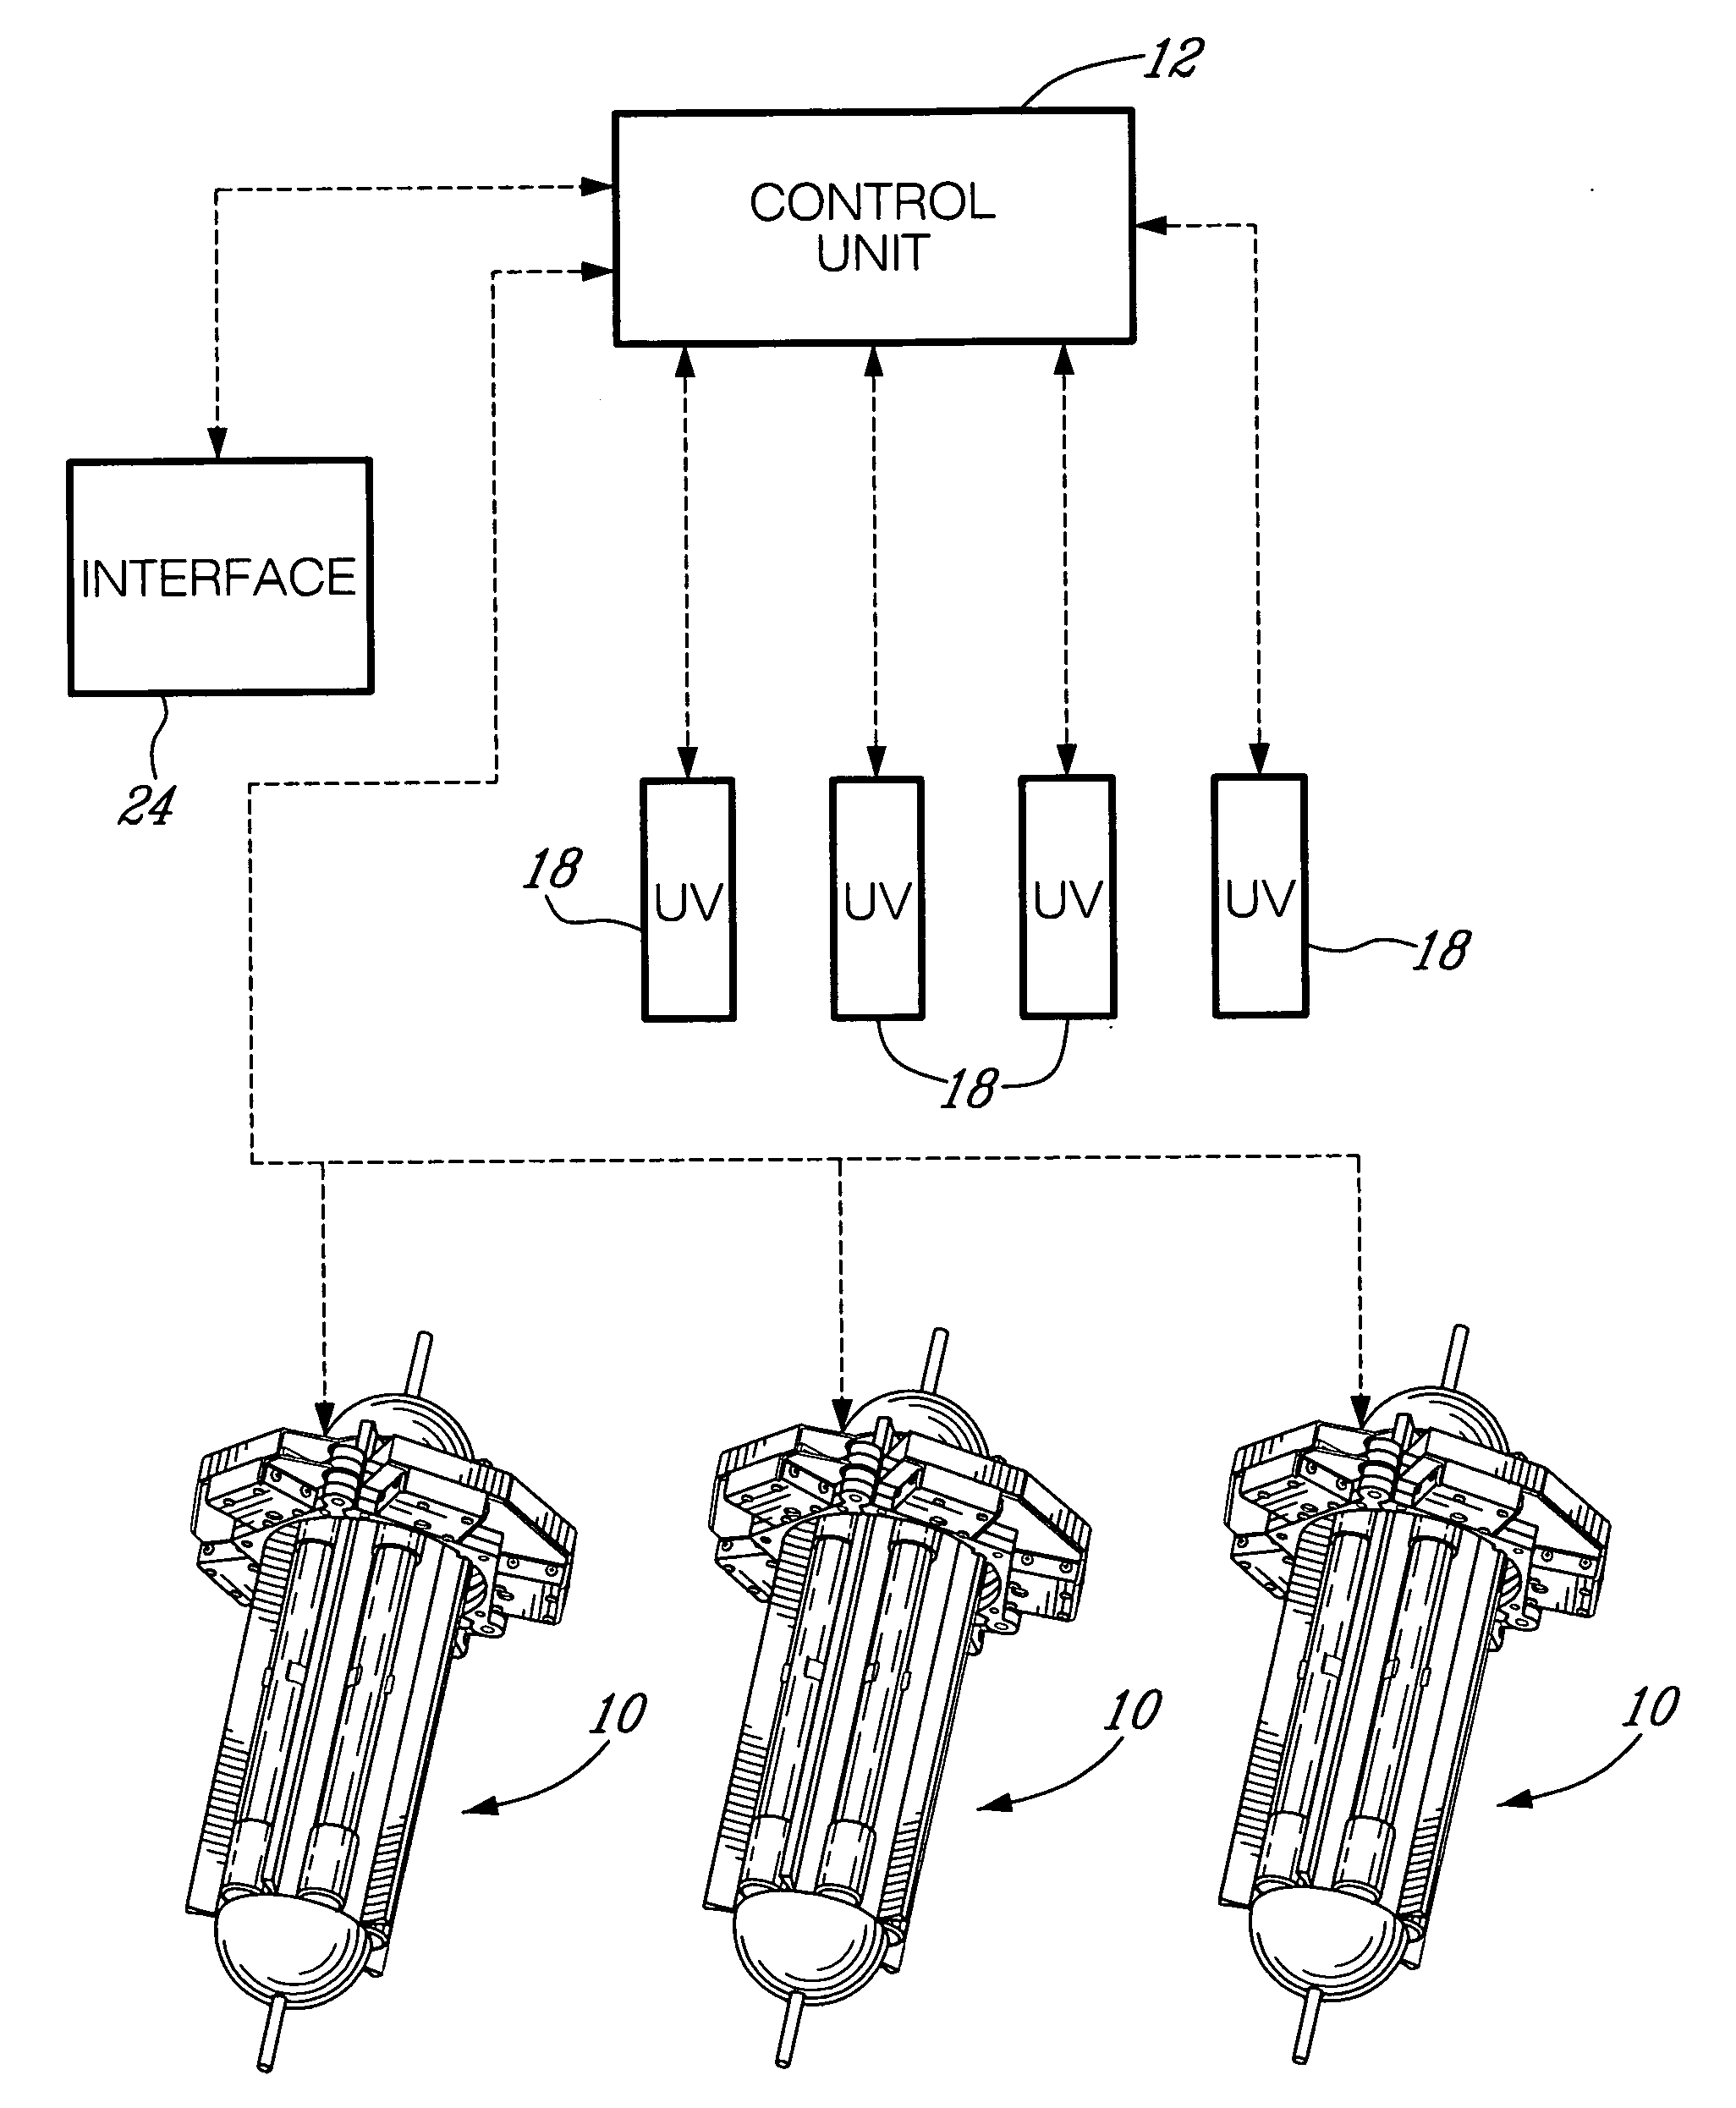 Controller for UV light purification system